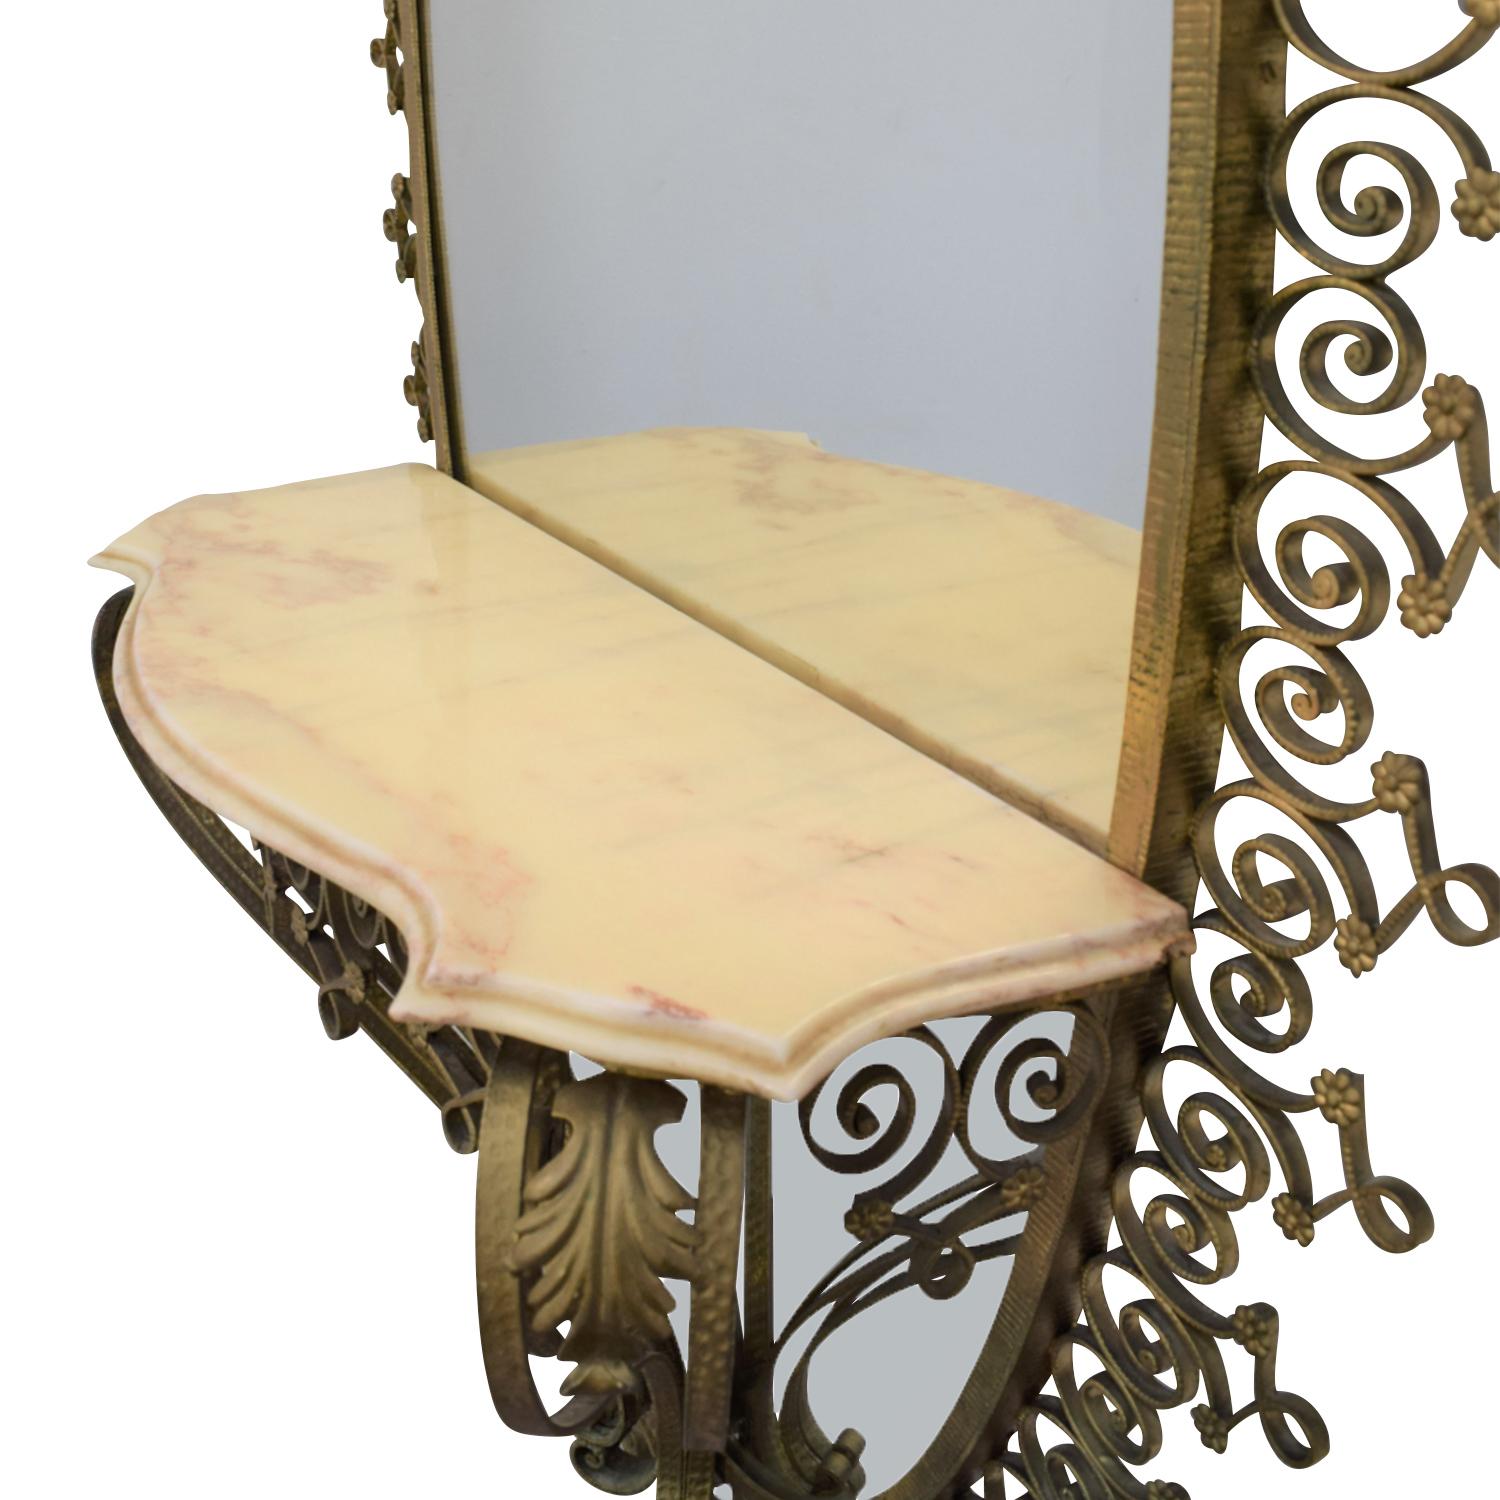 A gold, vintage Mid-Century Modern Italian full Size floor mirror made of handcrafted gilded wrought iron with its original mirrored glass, designed by Pier Luigi Colli in good condition. The oval wall mirror is composed with a console table